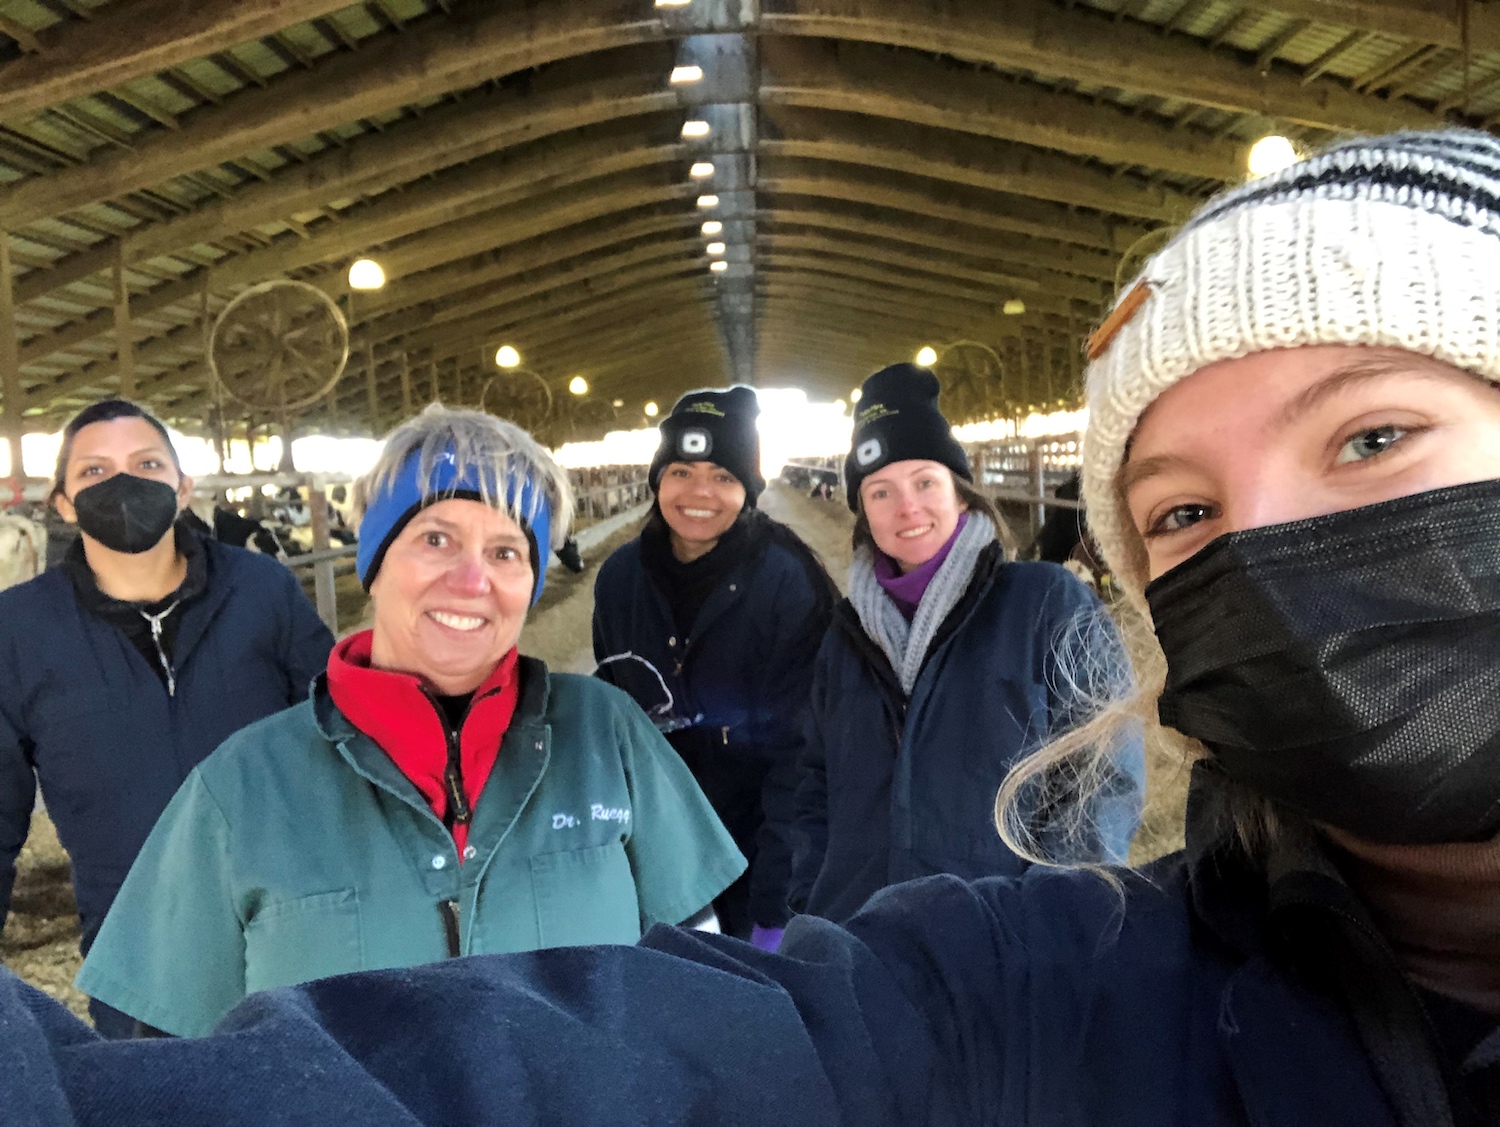 Pamela Ruegg at a Michigan dairy farm with students.